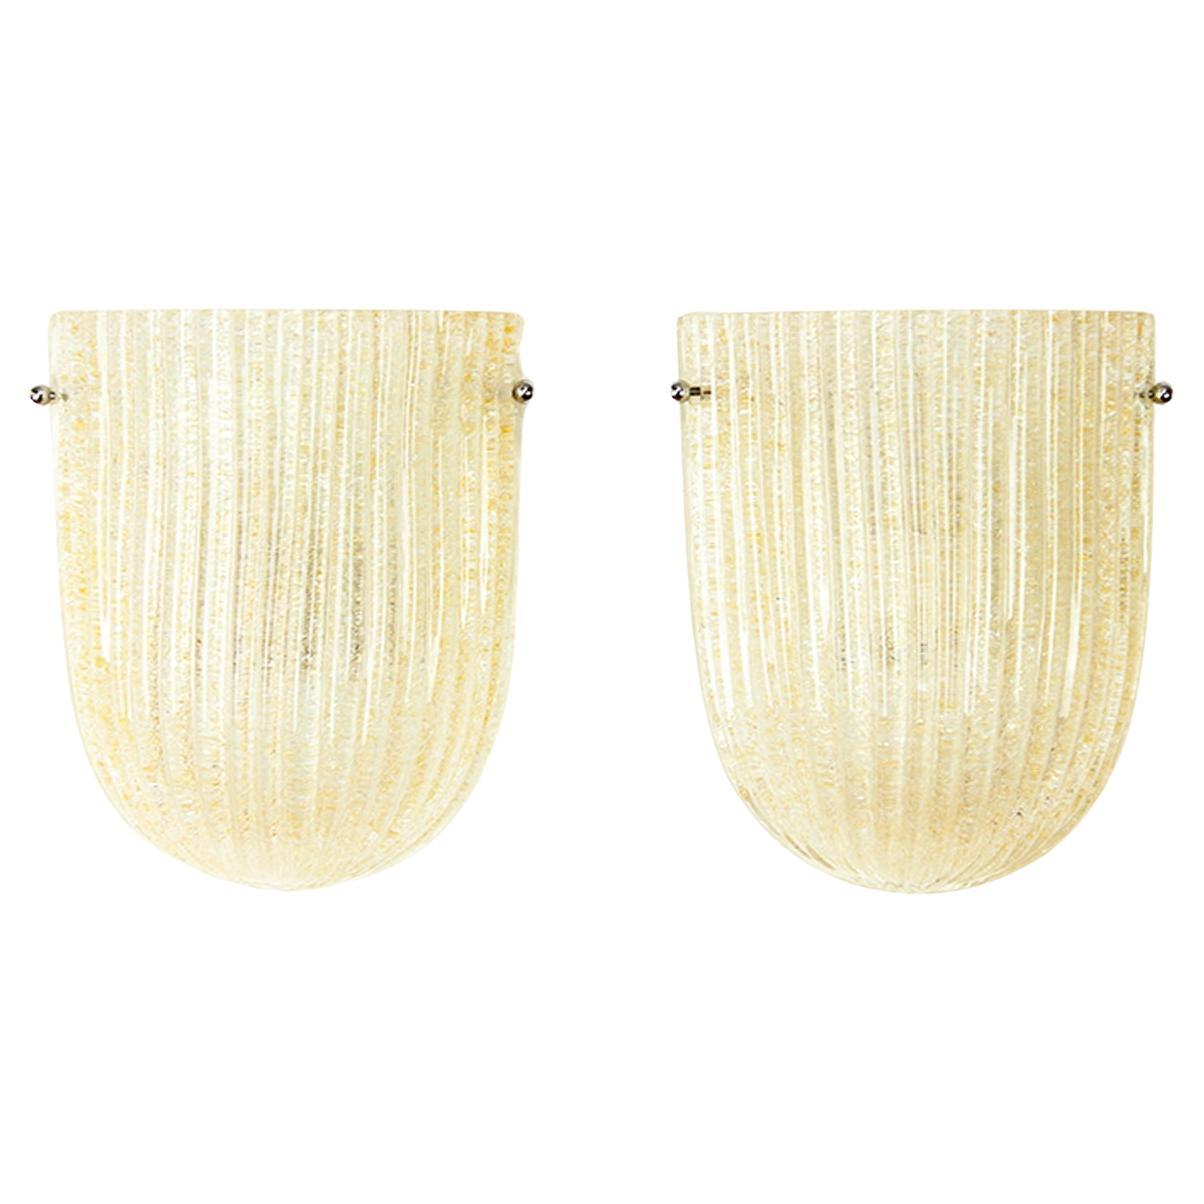 Pair of Murano Sconces by Zonca, Italy, 1970s For Sale